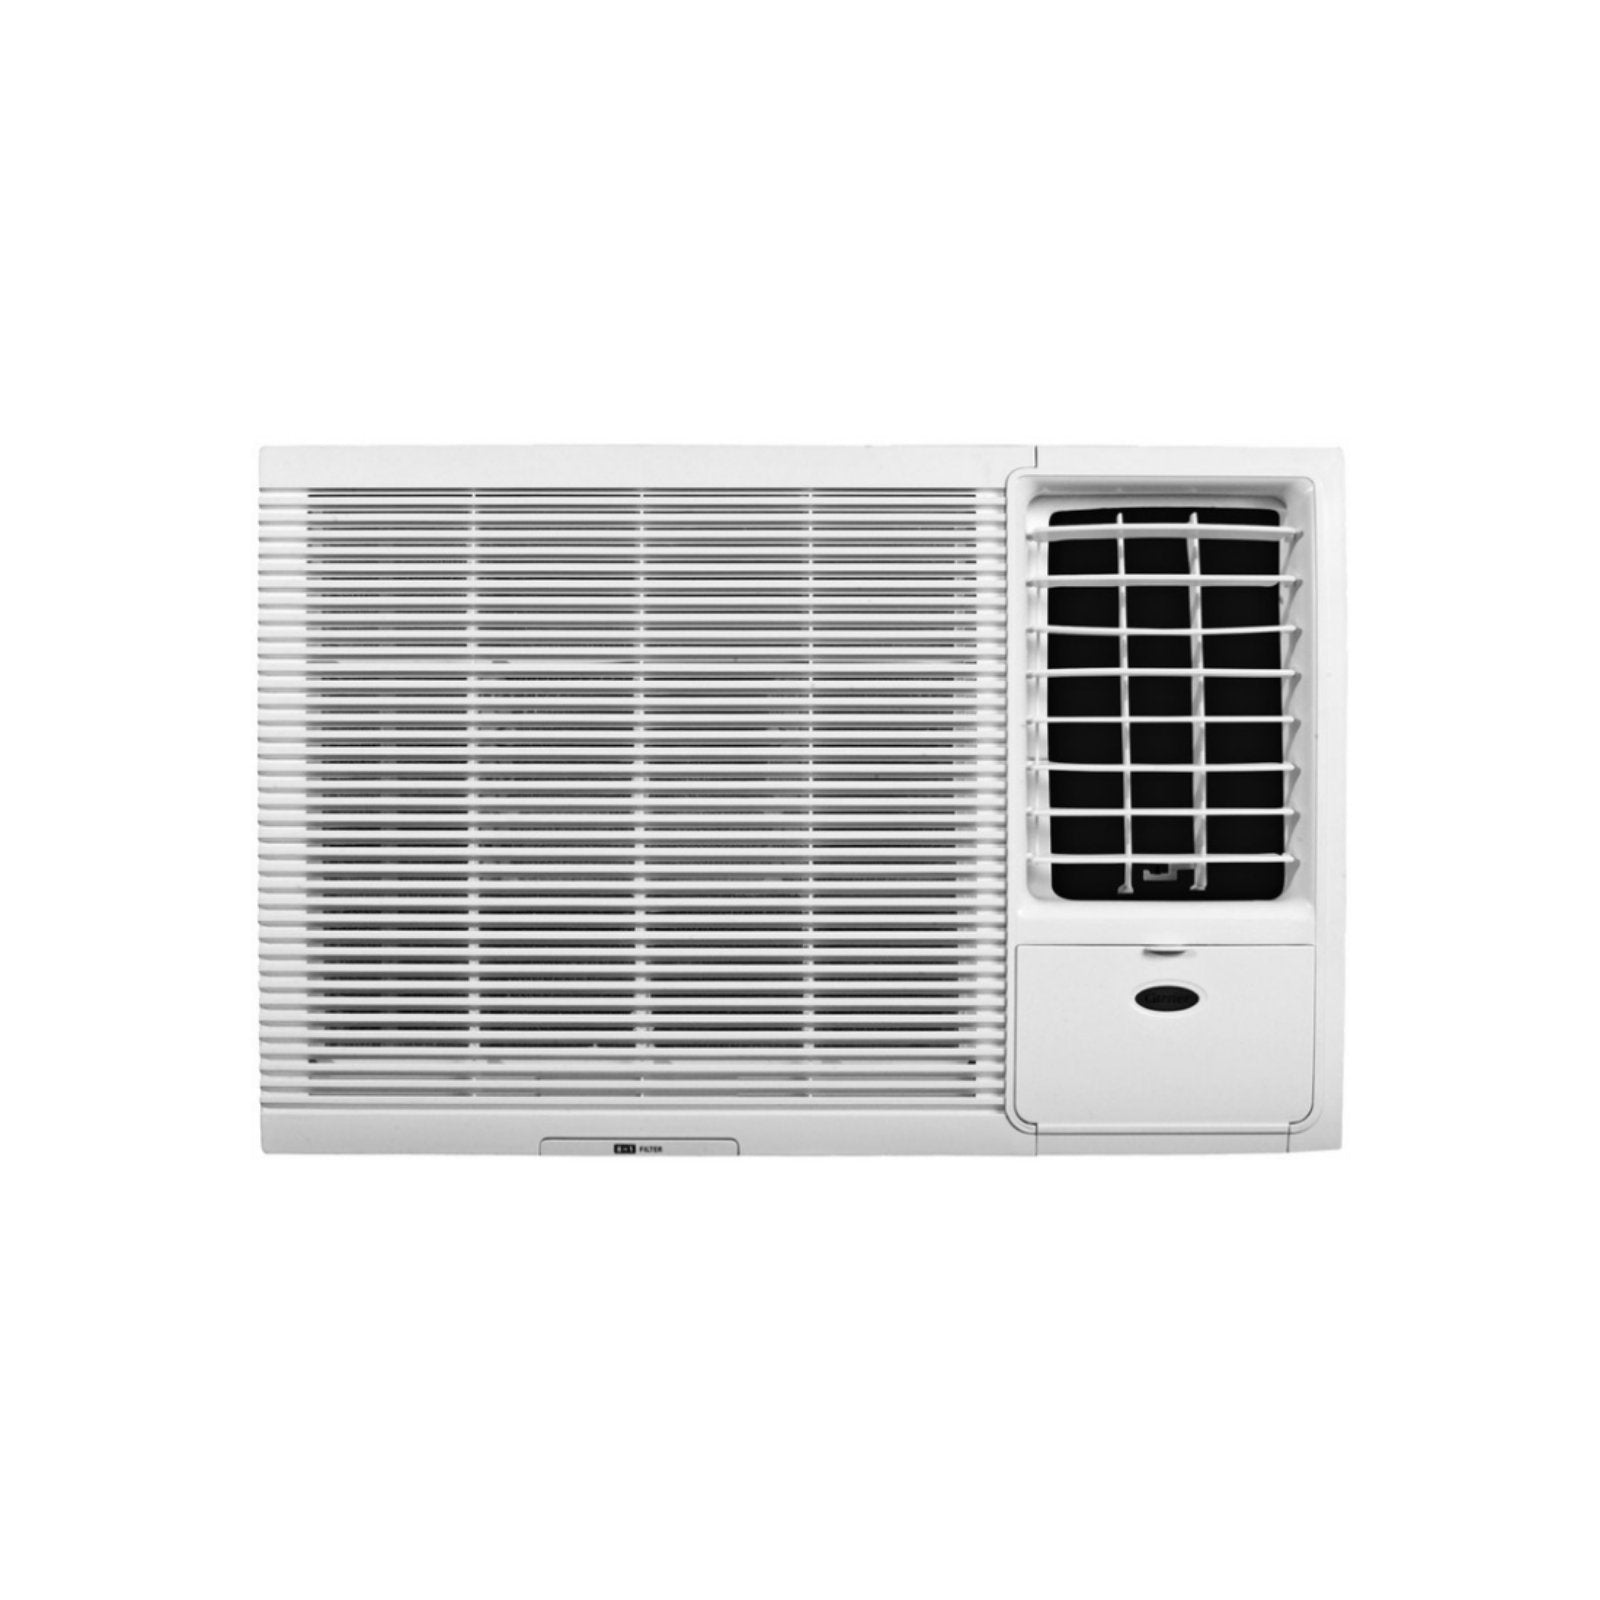 carrier-2.5hp-icool-green-window-type-airconditioner-full-view-mang-kosme